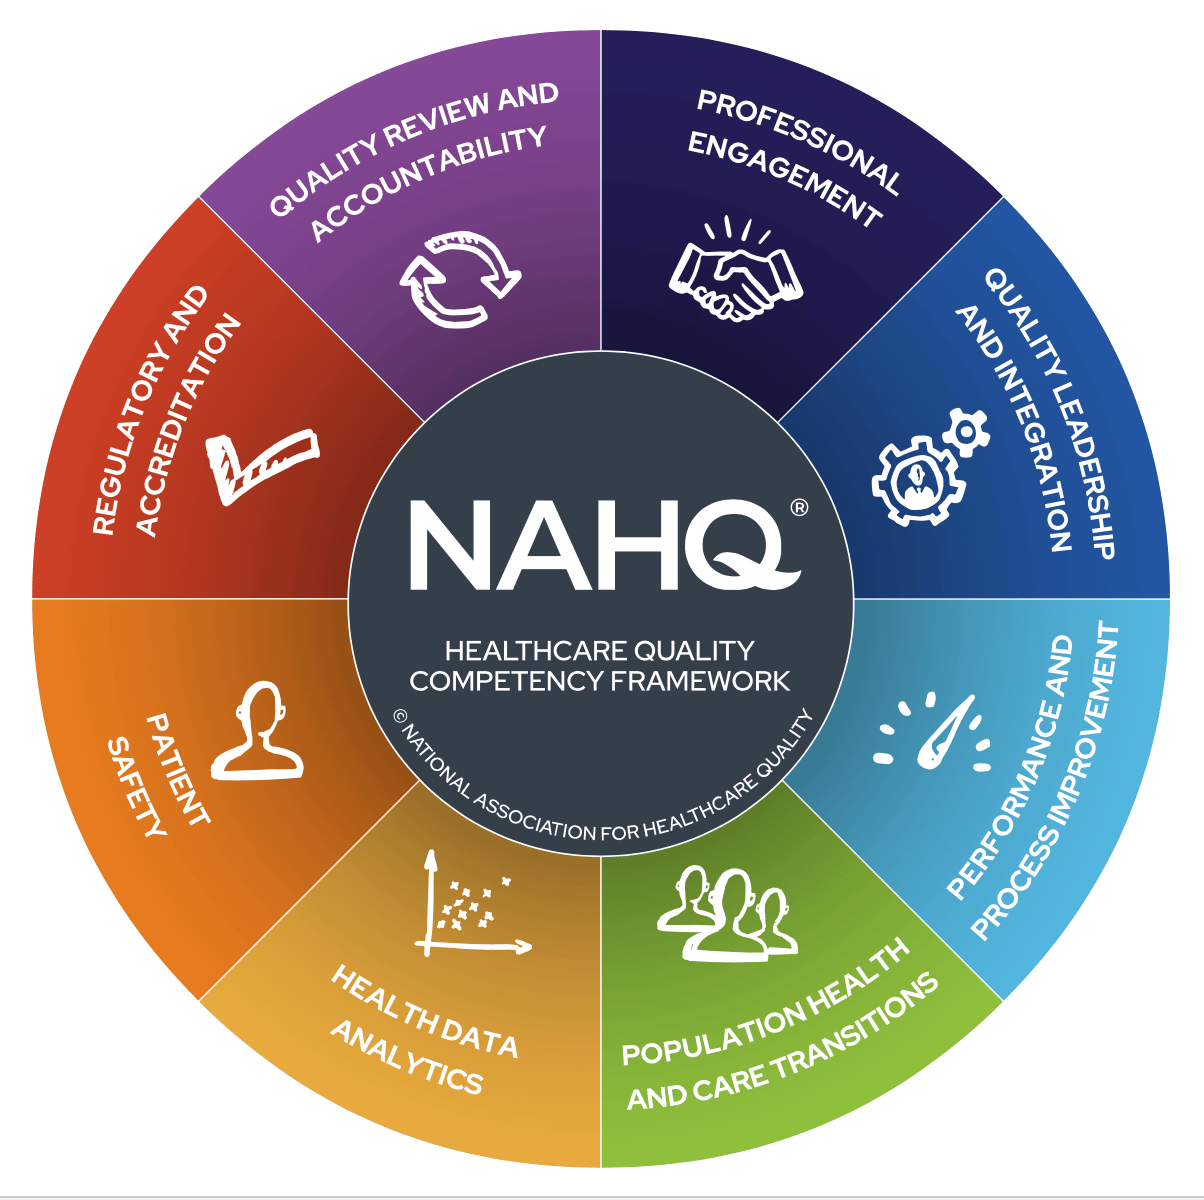 NAHQ Healthcare Quality Competency Framework graphic